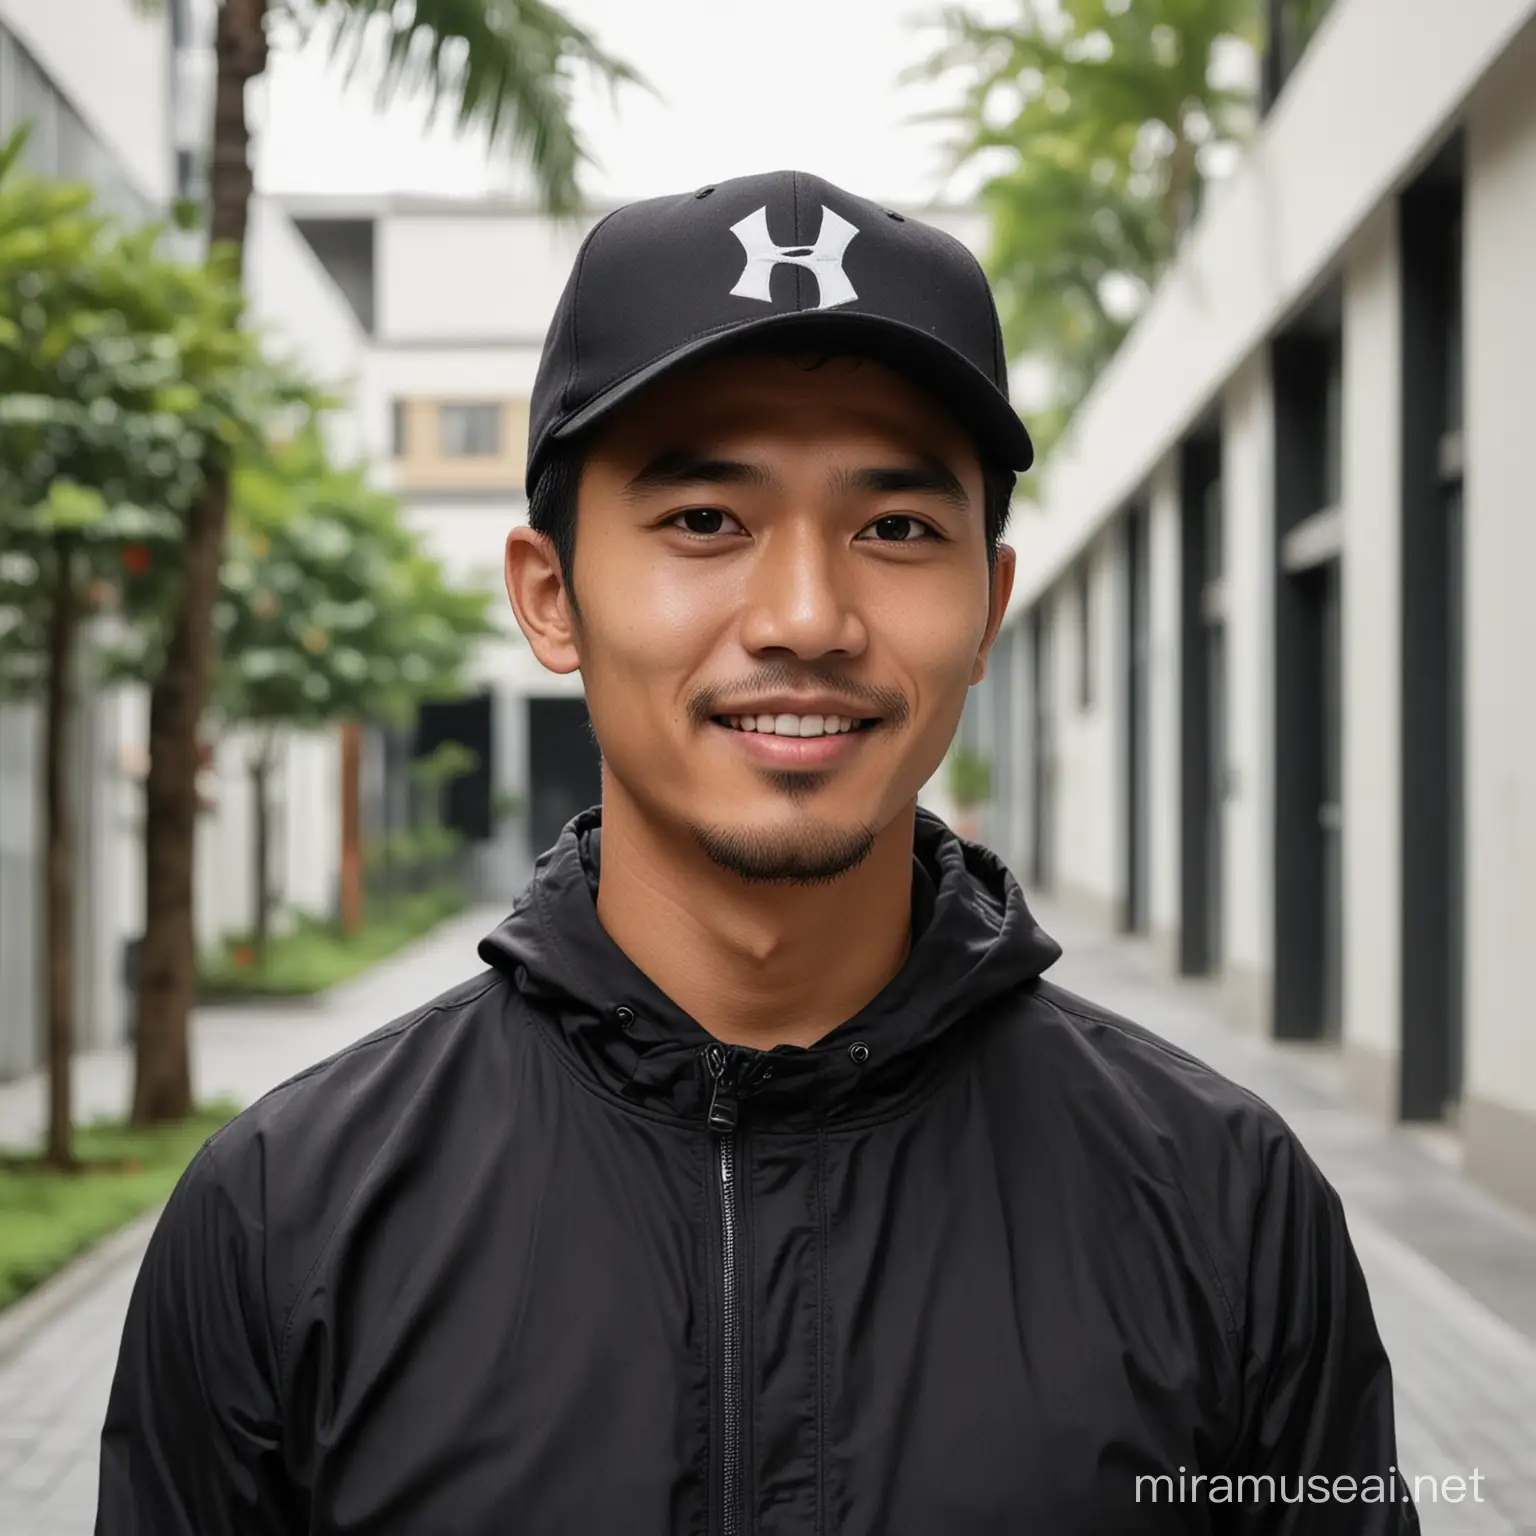 Young Indonesian Man in Basketball Cap at Office Courtyard